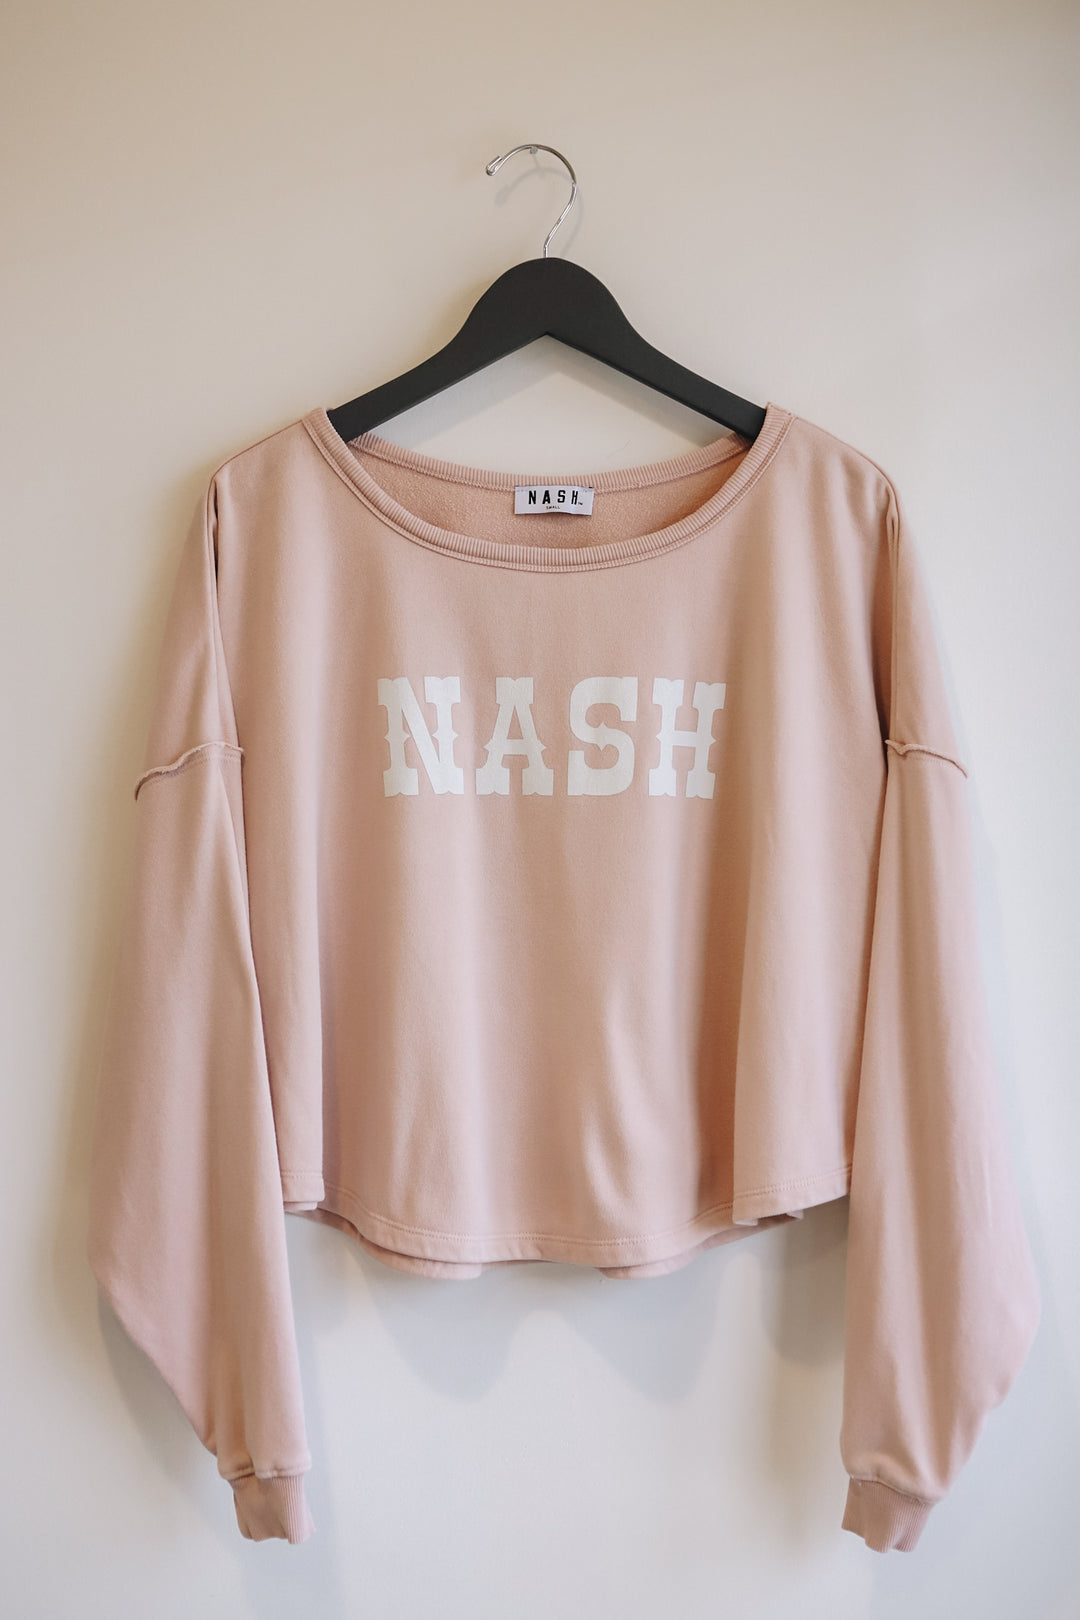 NASH in a western font on the boxy boatneck crewneck